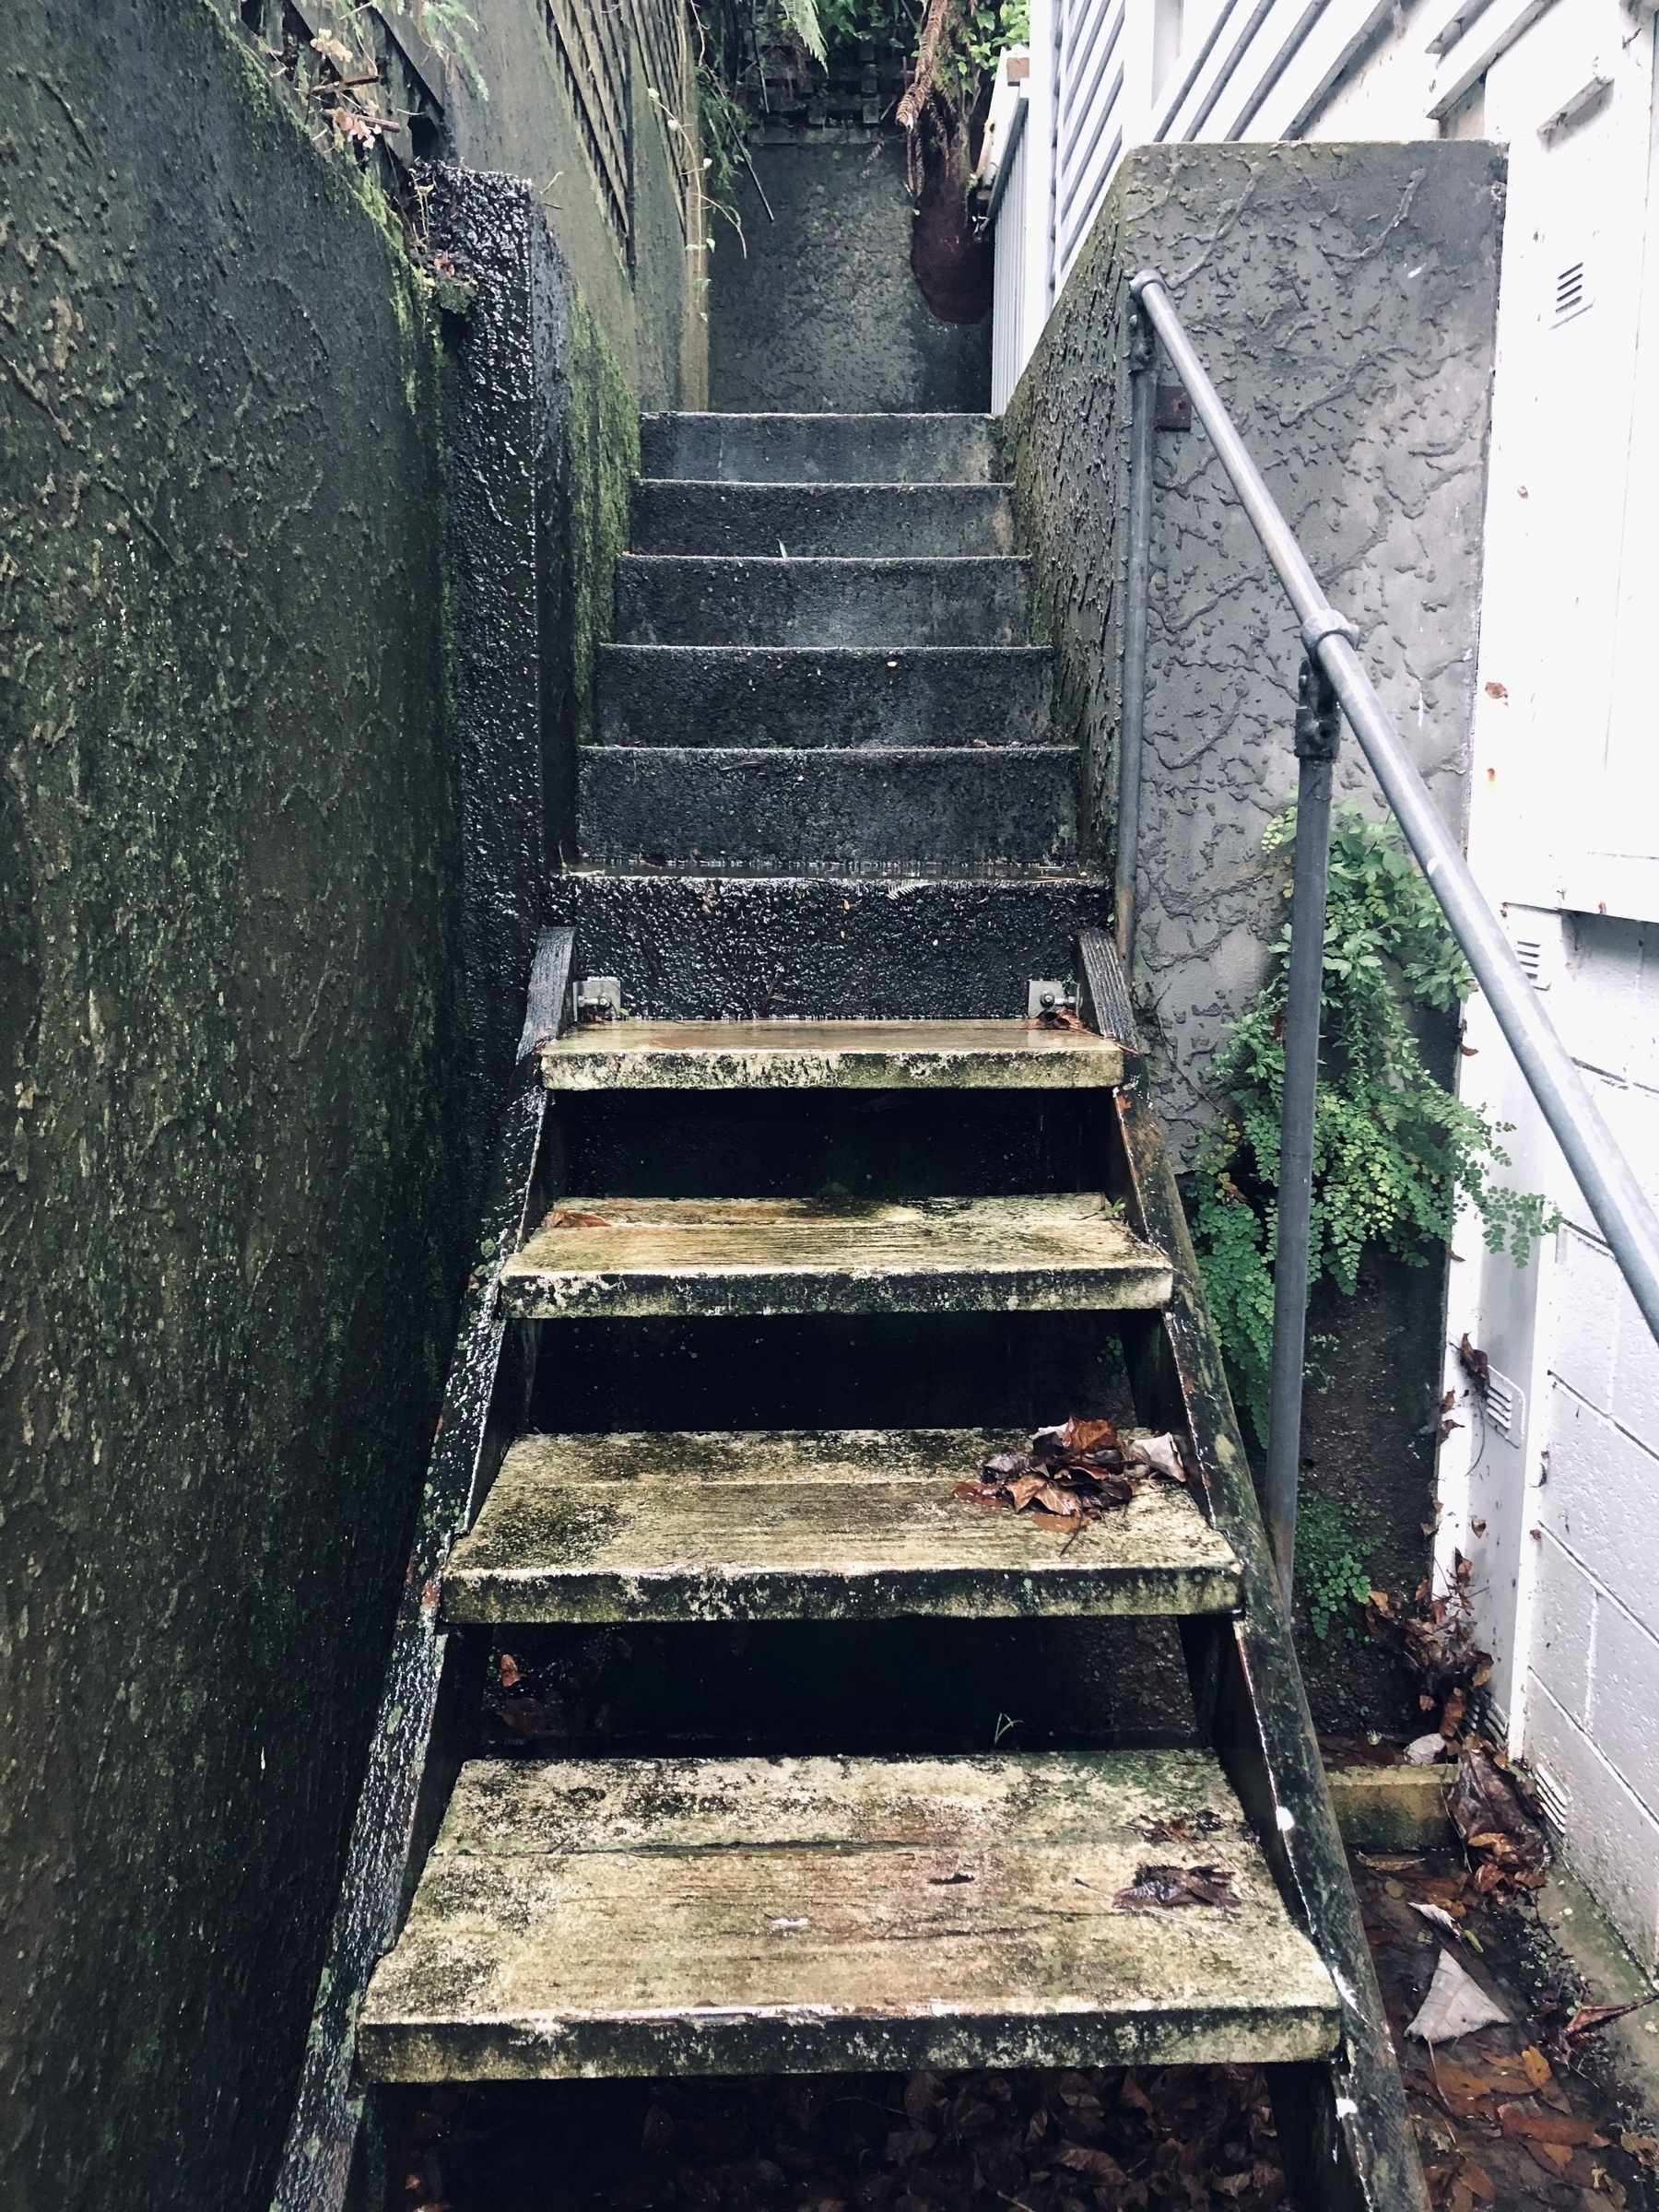 Wet, mossy flight of stairs